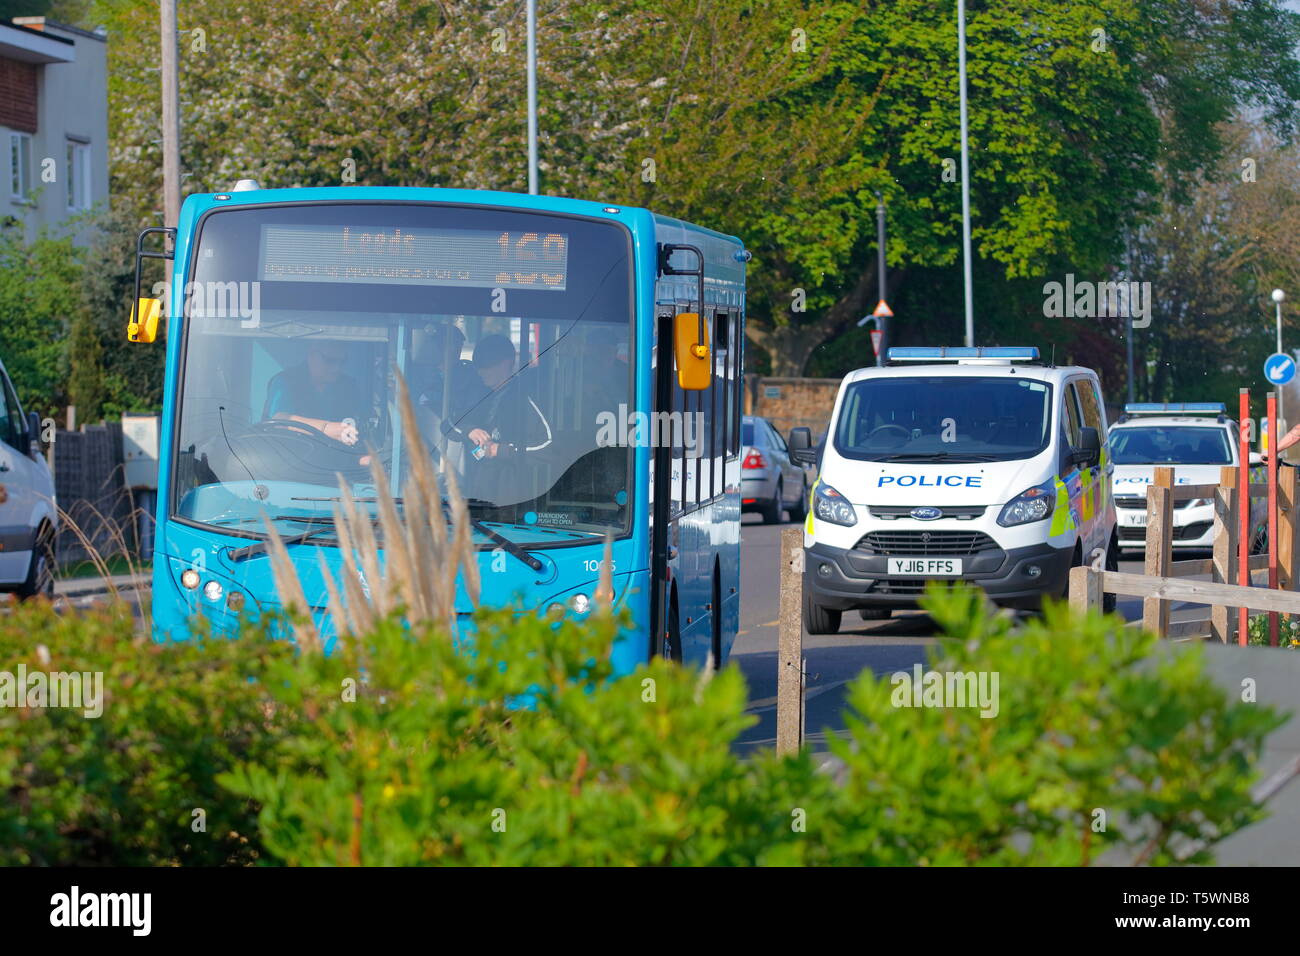 The scene of a near miss incident involving a bus & cyclist . Police were called to the scen after the cyclist became abusive. Stock Photo